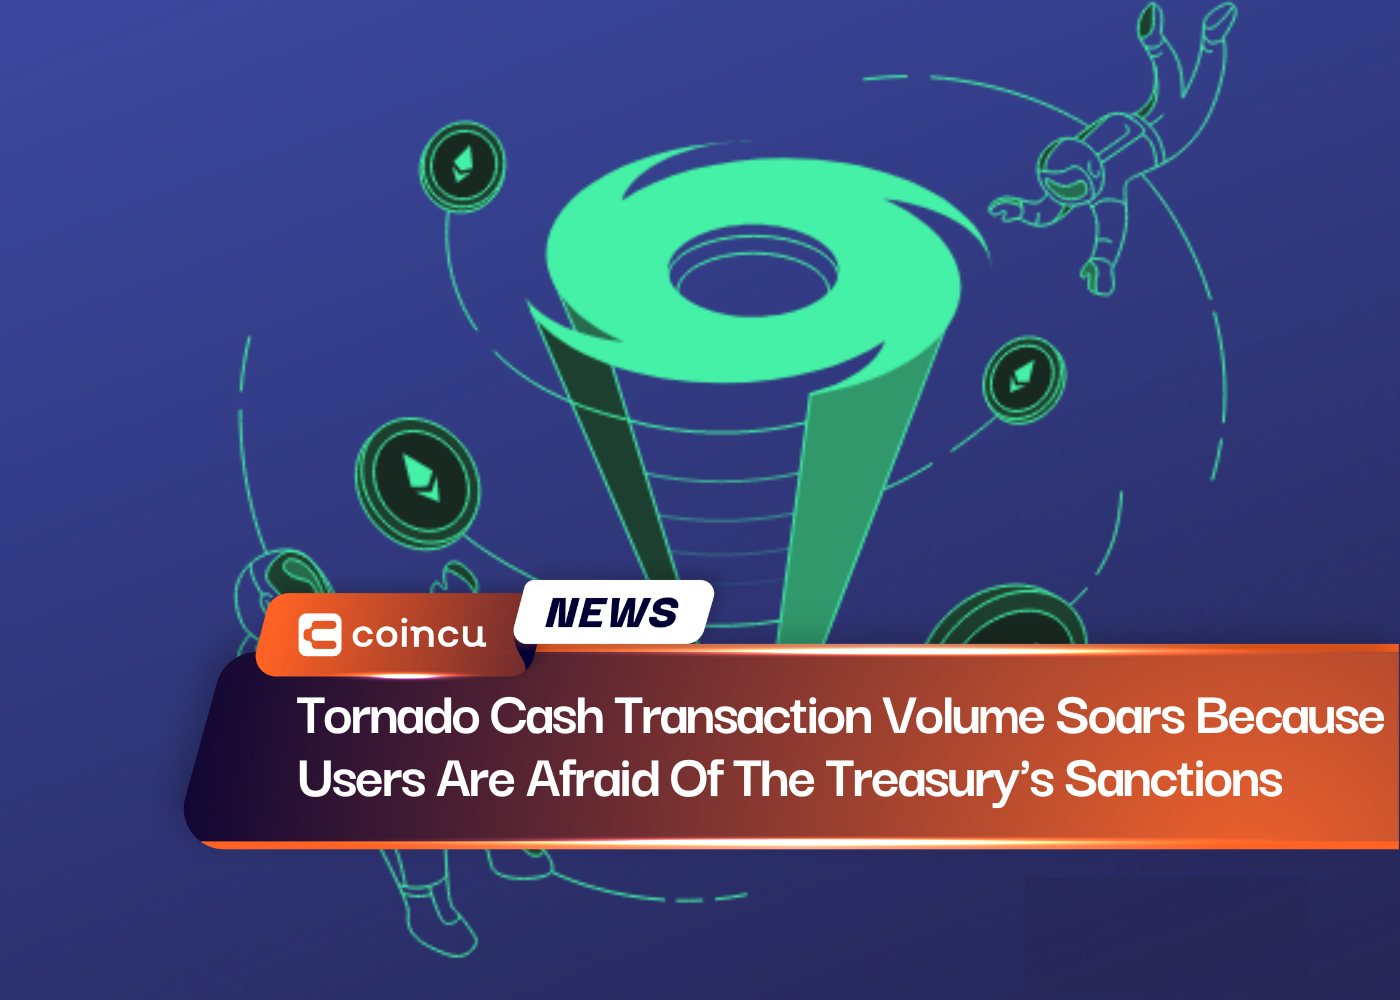 Tornado Cash Transaction Volume Soars Because Users Are Afraid Of The Treasury's Sanctions